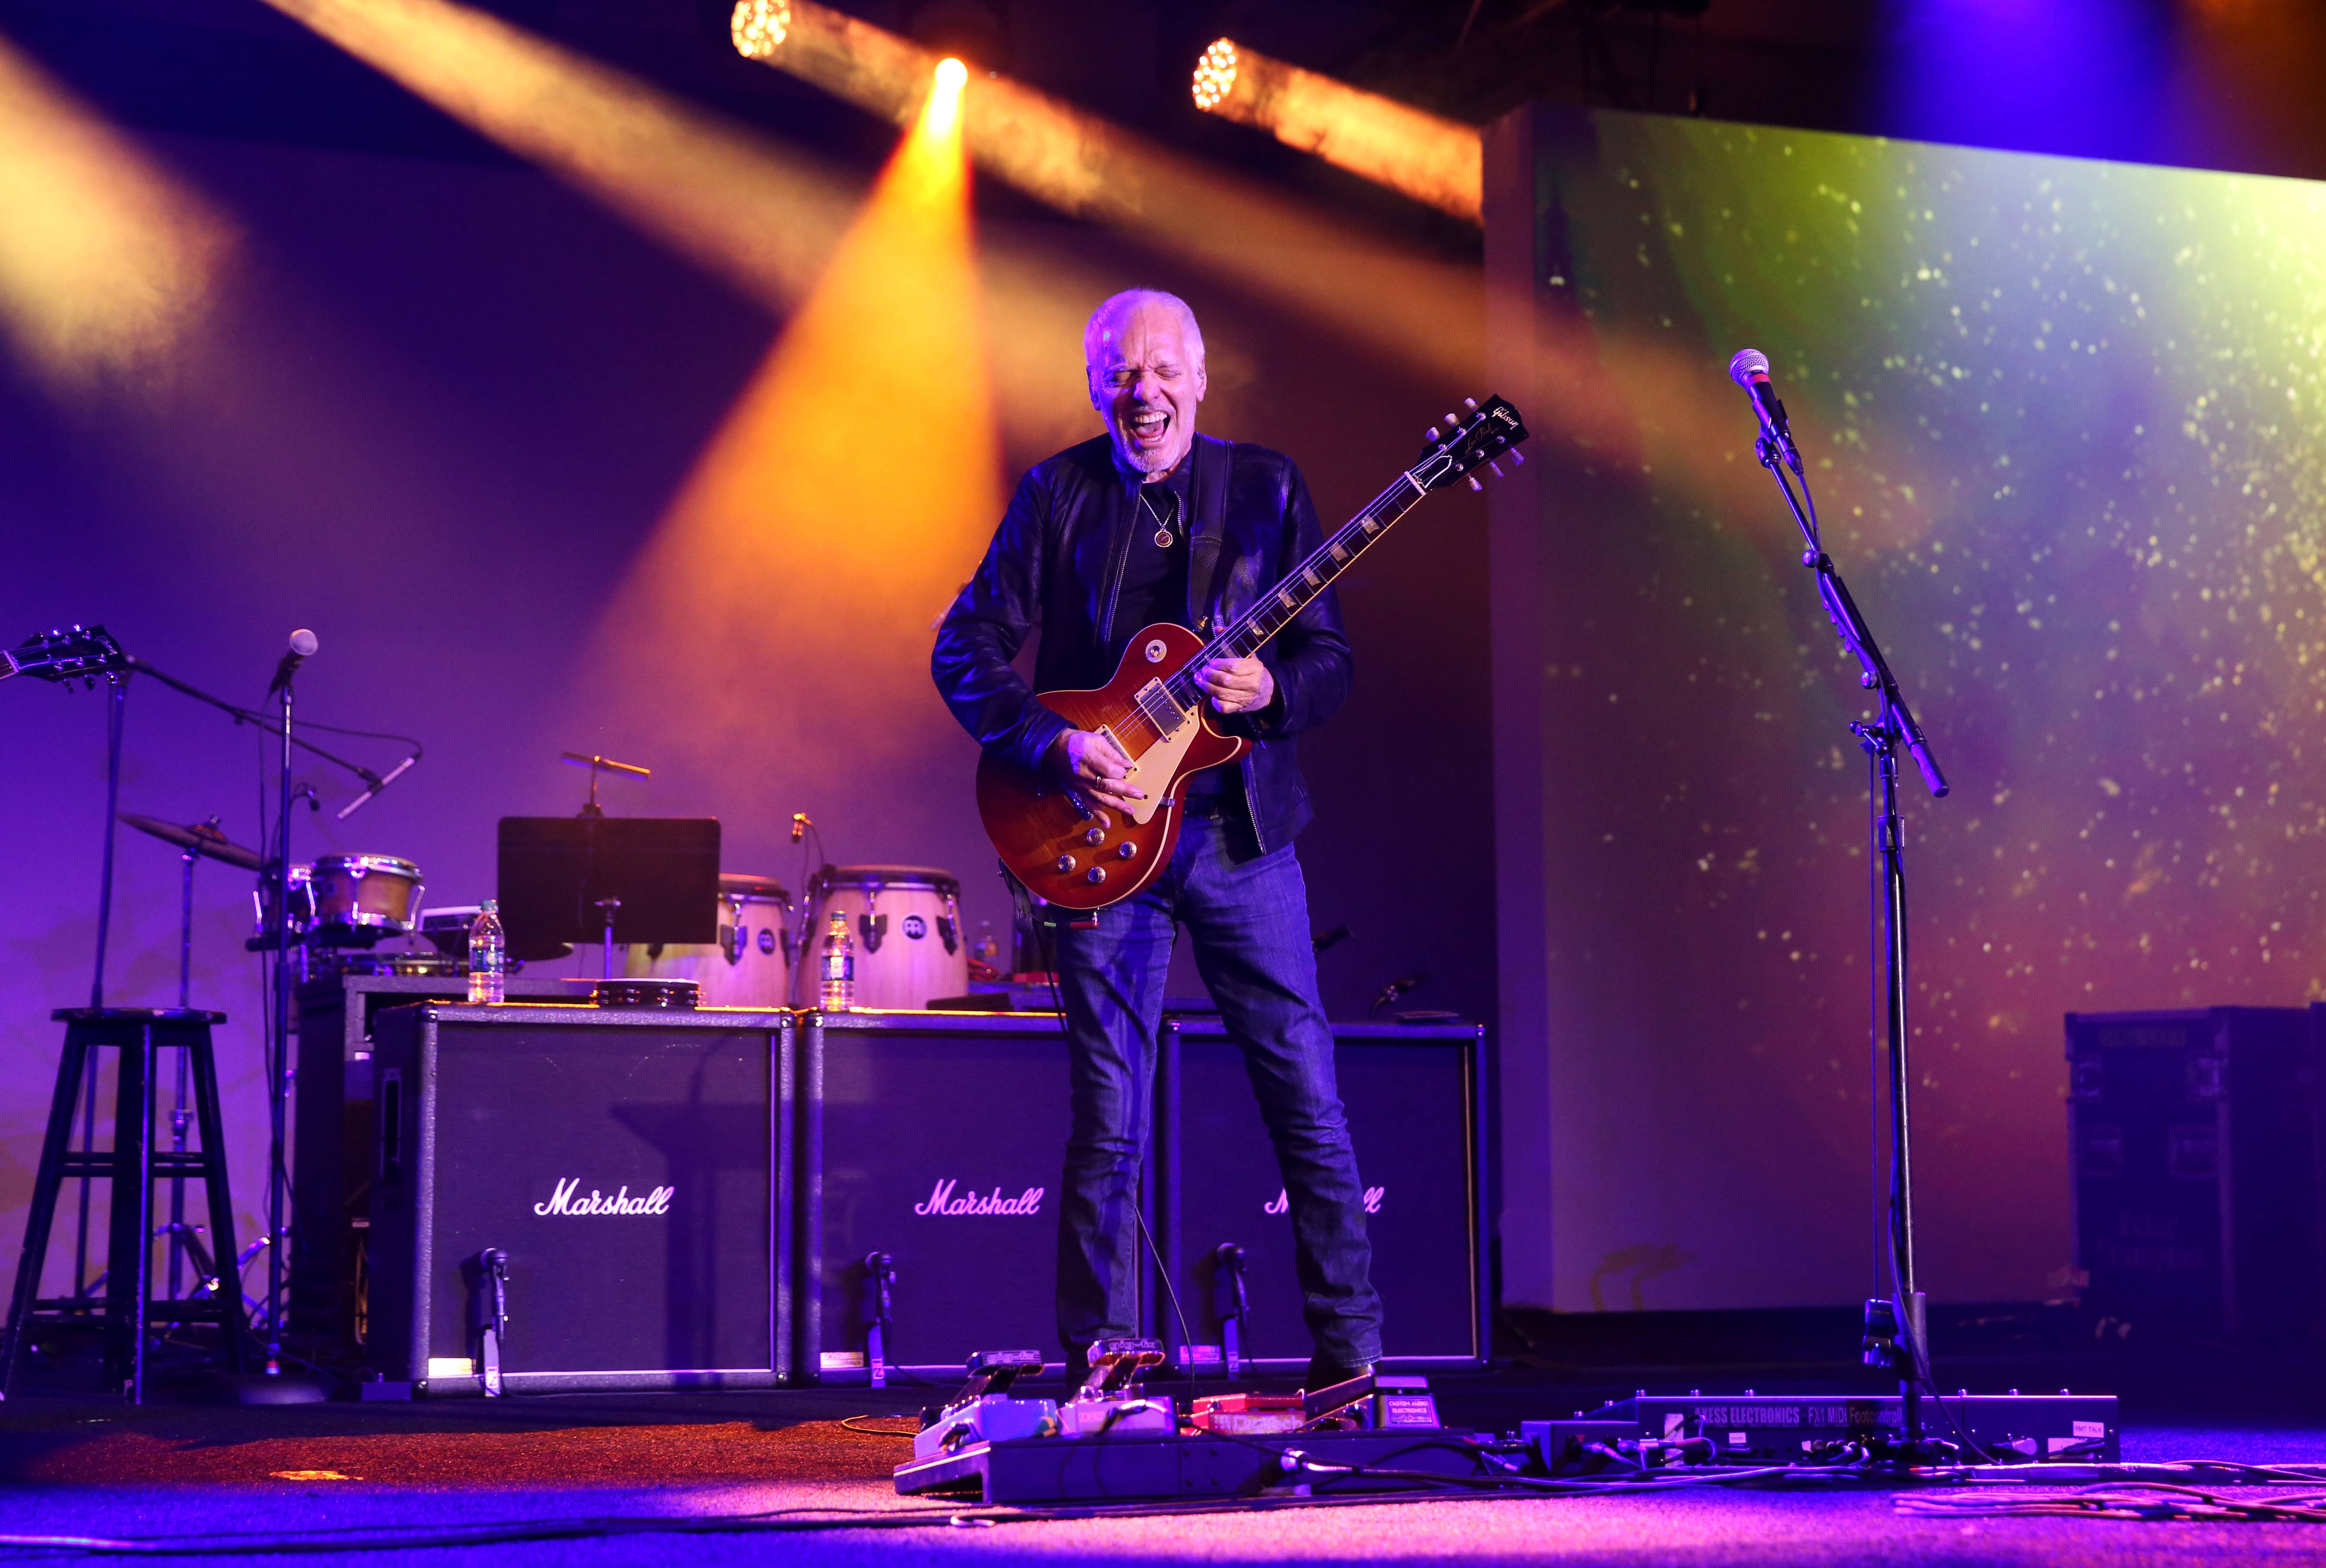 Peter Frampton performs onstage at the TEC Awards during the 2019 NAMM Show at the Hilton Anaheim on Jan. 26, 2019, in Anaheim, Calif.